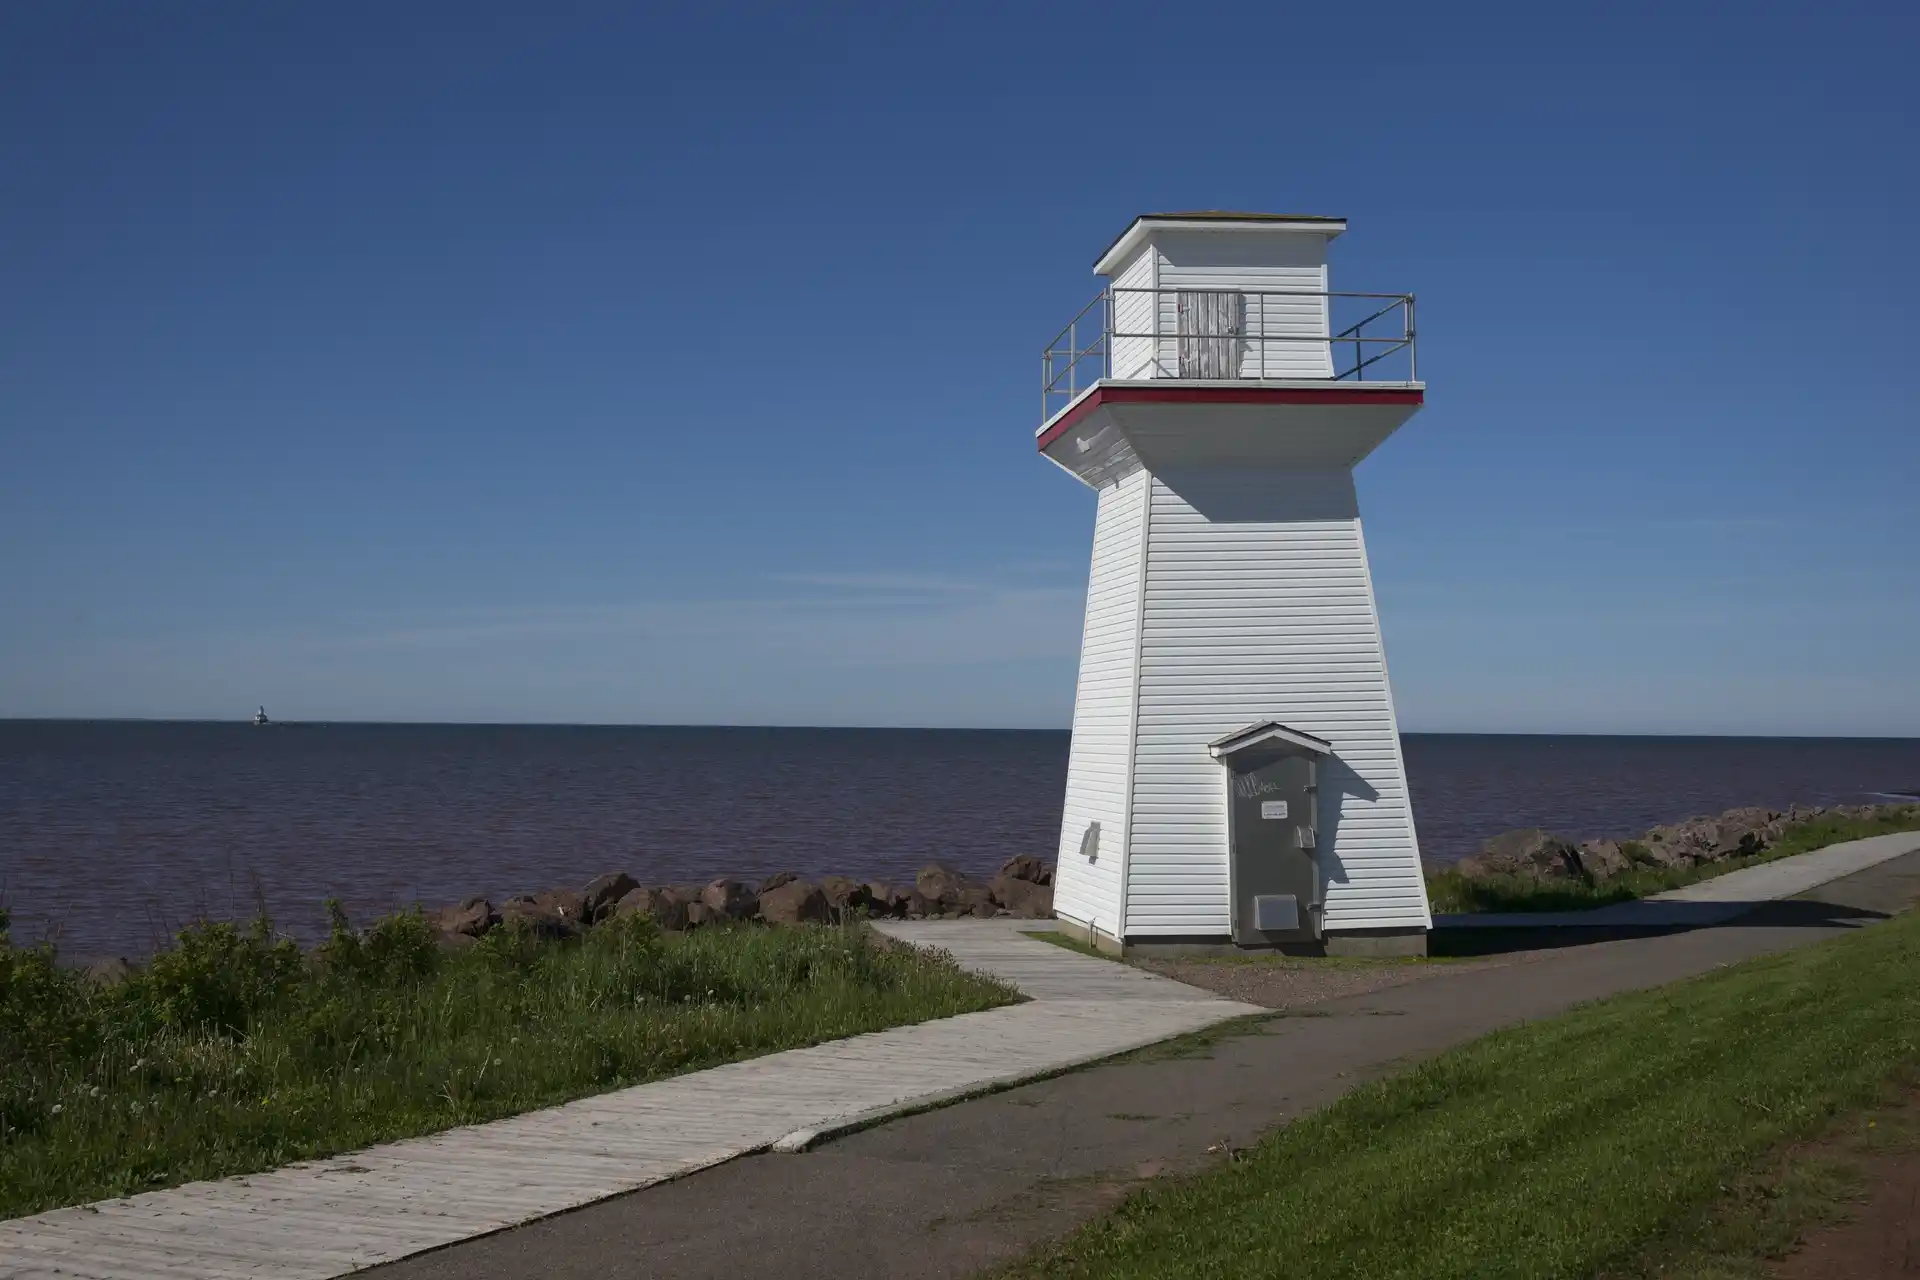 Prince Edward Island PNP DRaw On June 16, the province of Prince Edward Island held a new provincial draw issuing invitations to apply to 136 skilled worker and entrepreneur Canada immigration candidates. PEI PNP Draws